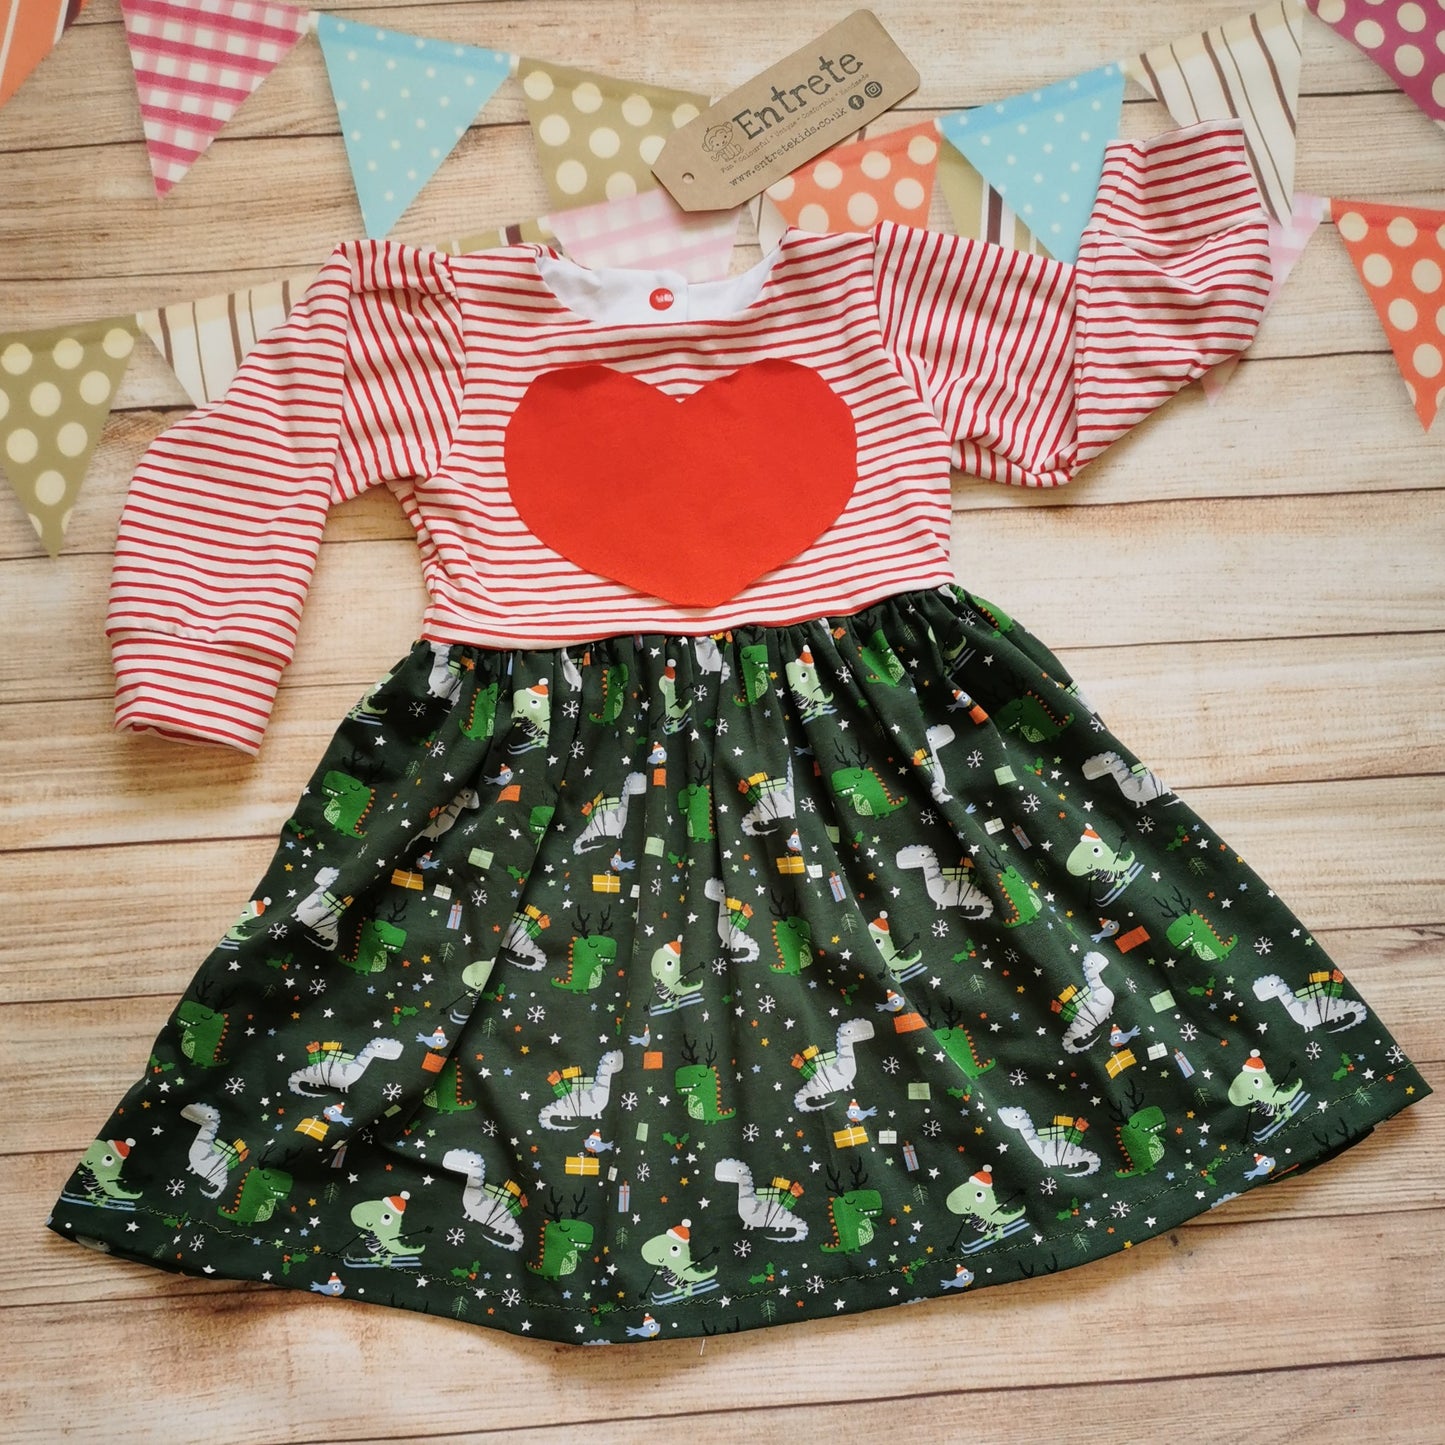 Girls Christmas dress, handmade using the brilliant dark green festasaurus cotton jersey and red striped cotton jersey with adorable red heart detailing. A dinosaur fanatics dream!